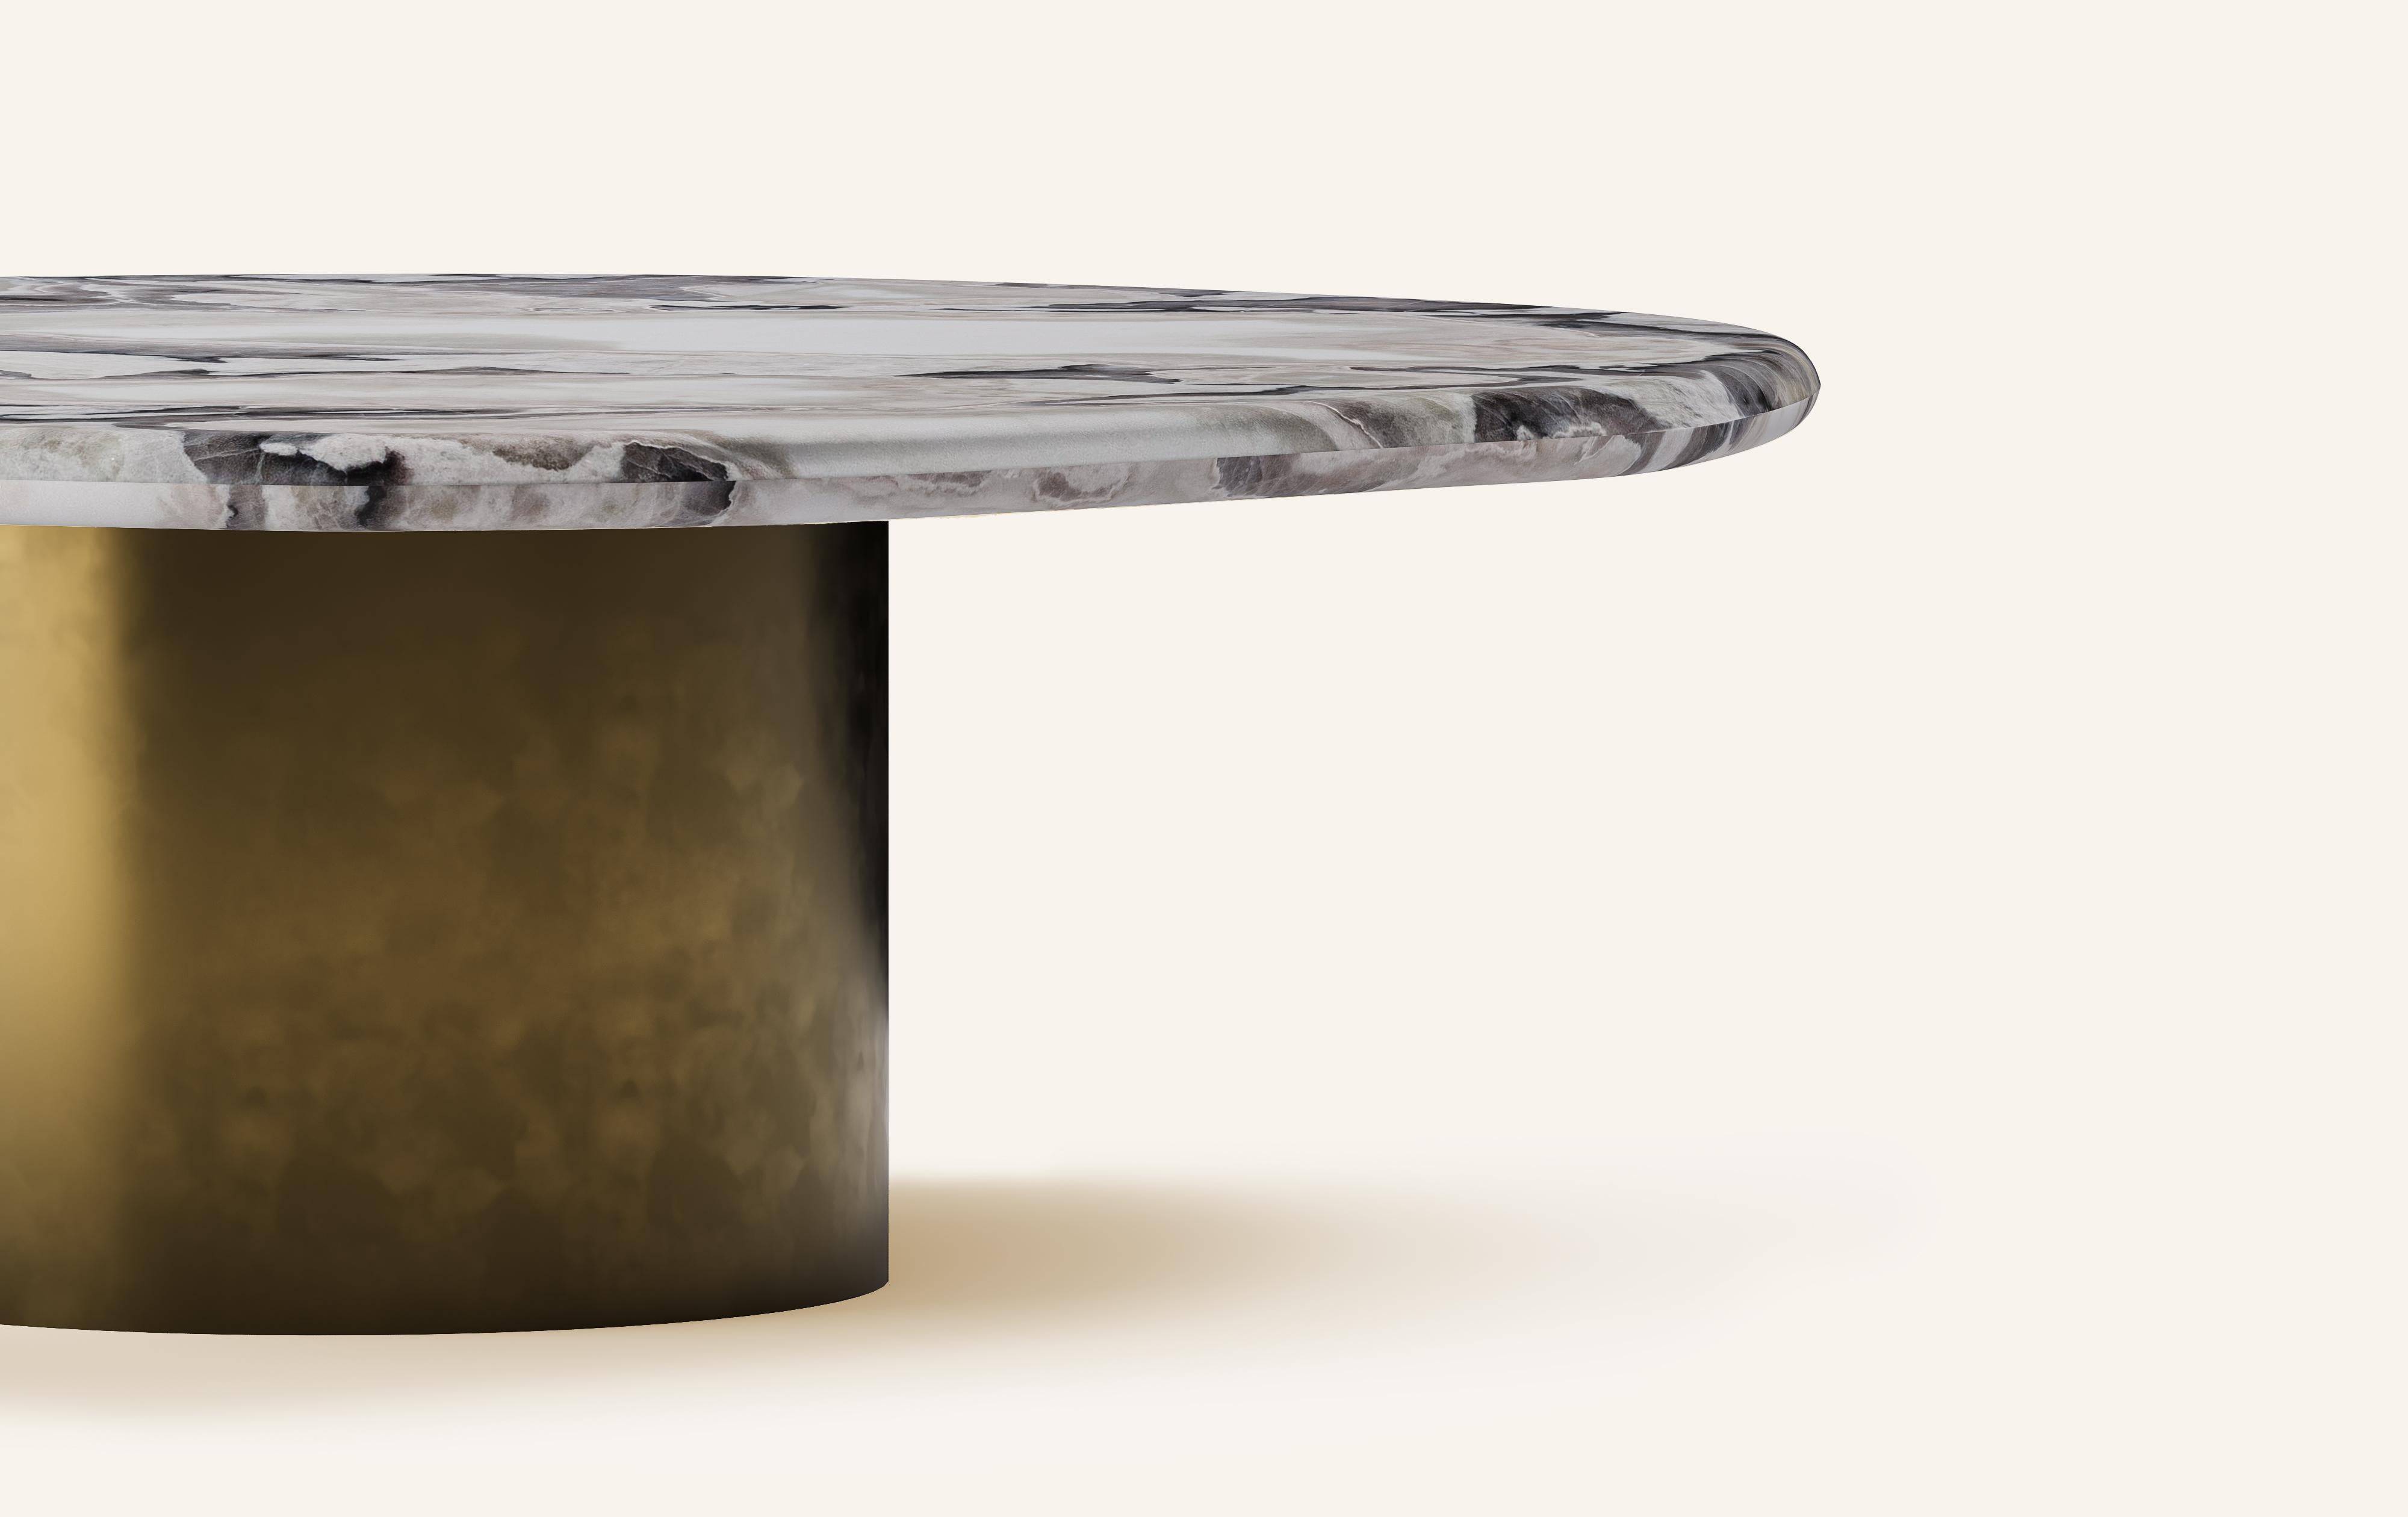 Organic Modern FORM(LA) Lago Round Coffee Table 54”L x 54”W x 14”H Oyster Marble & Bronze For Sale